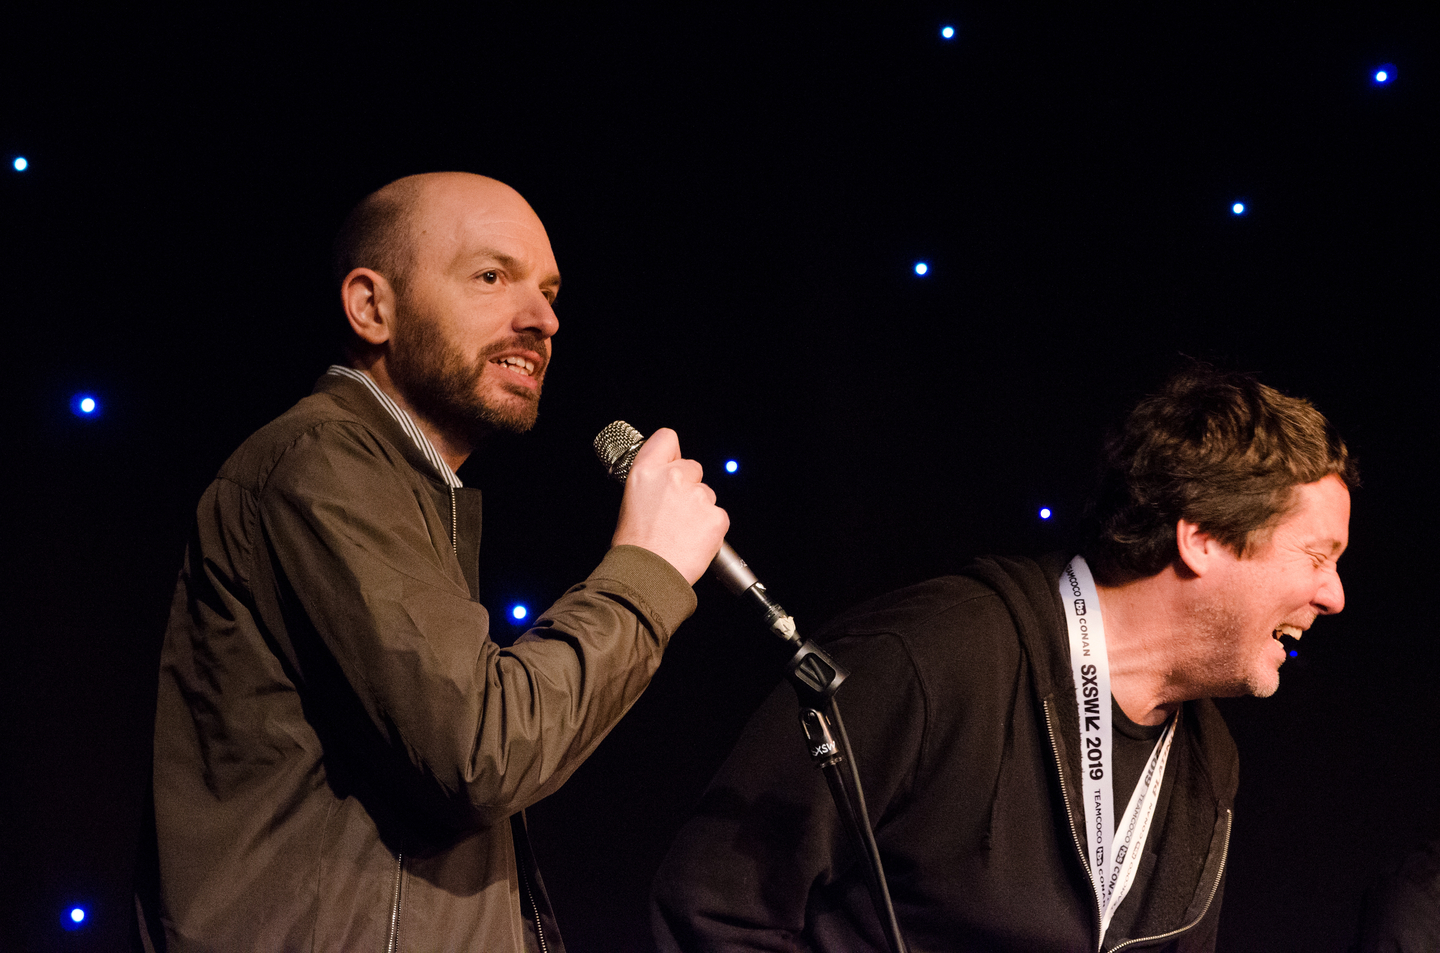 Paul Scheer at the Doug Loves Movies (Podcast Recording) – Photo by Karla Reina